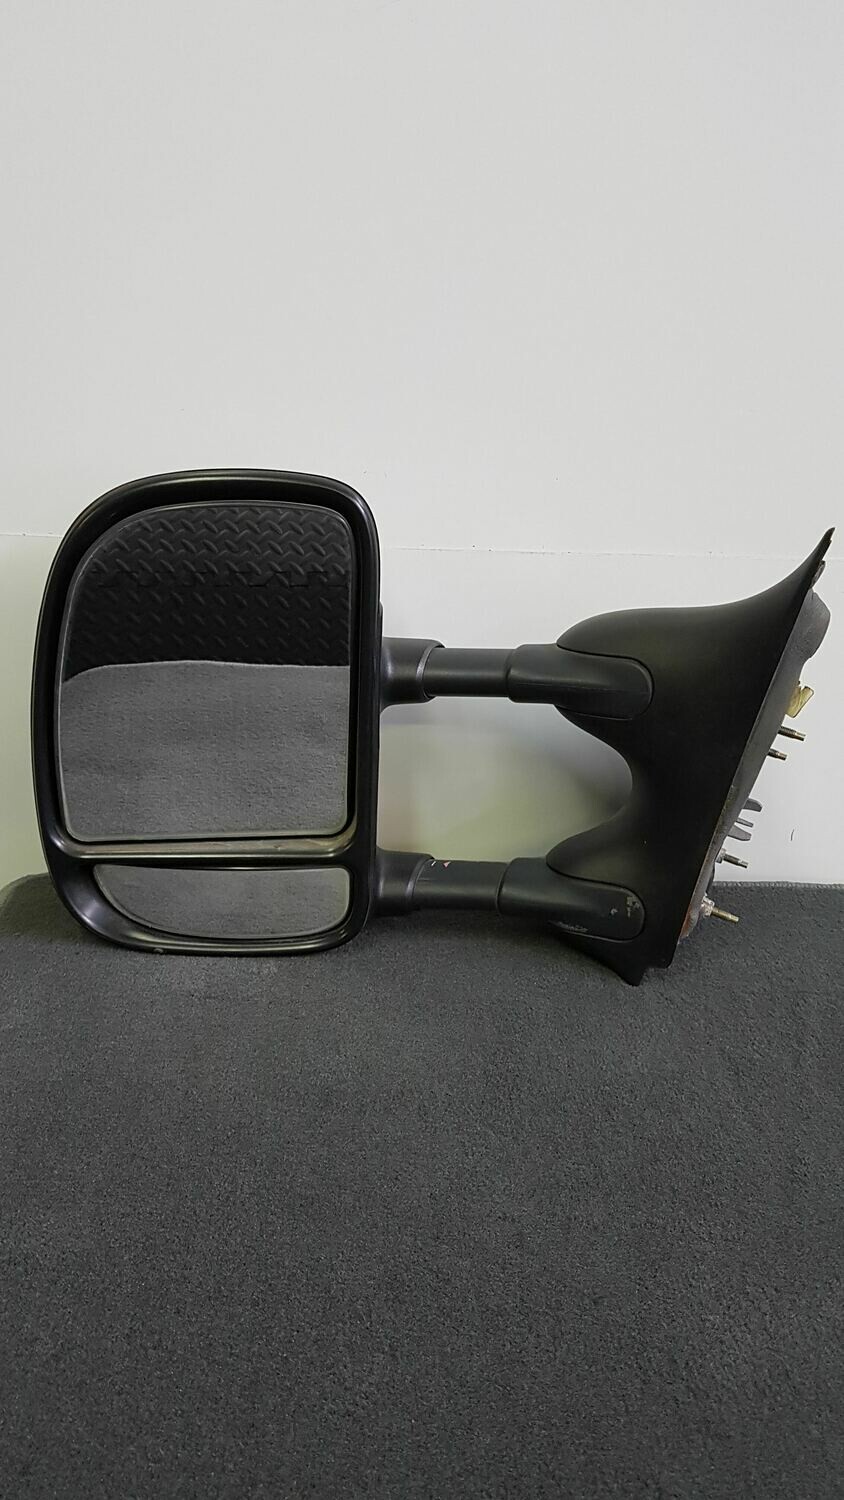 Driver's Side Ford E series van Mirror